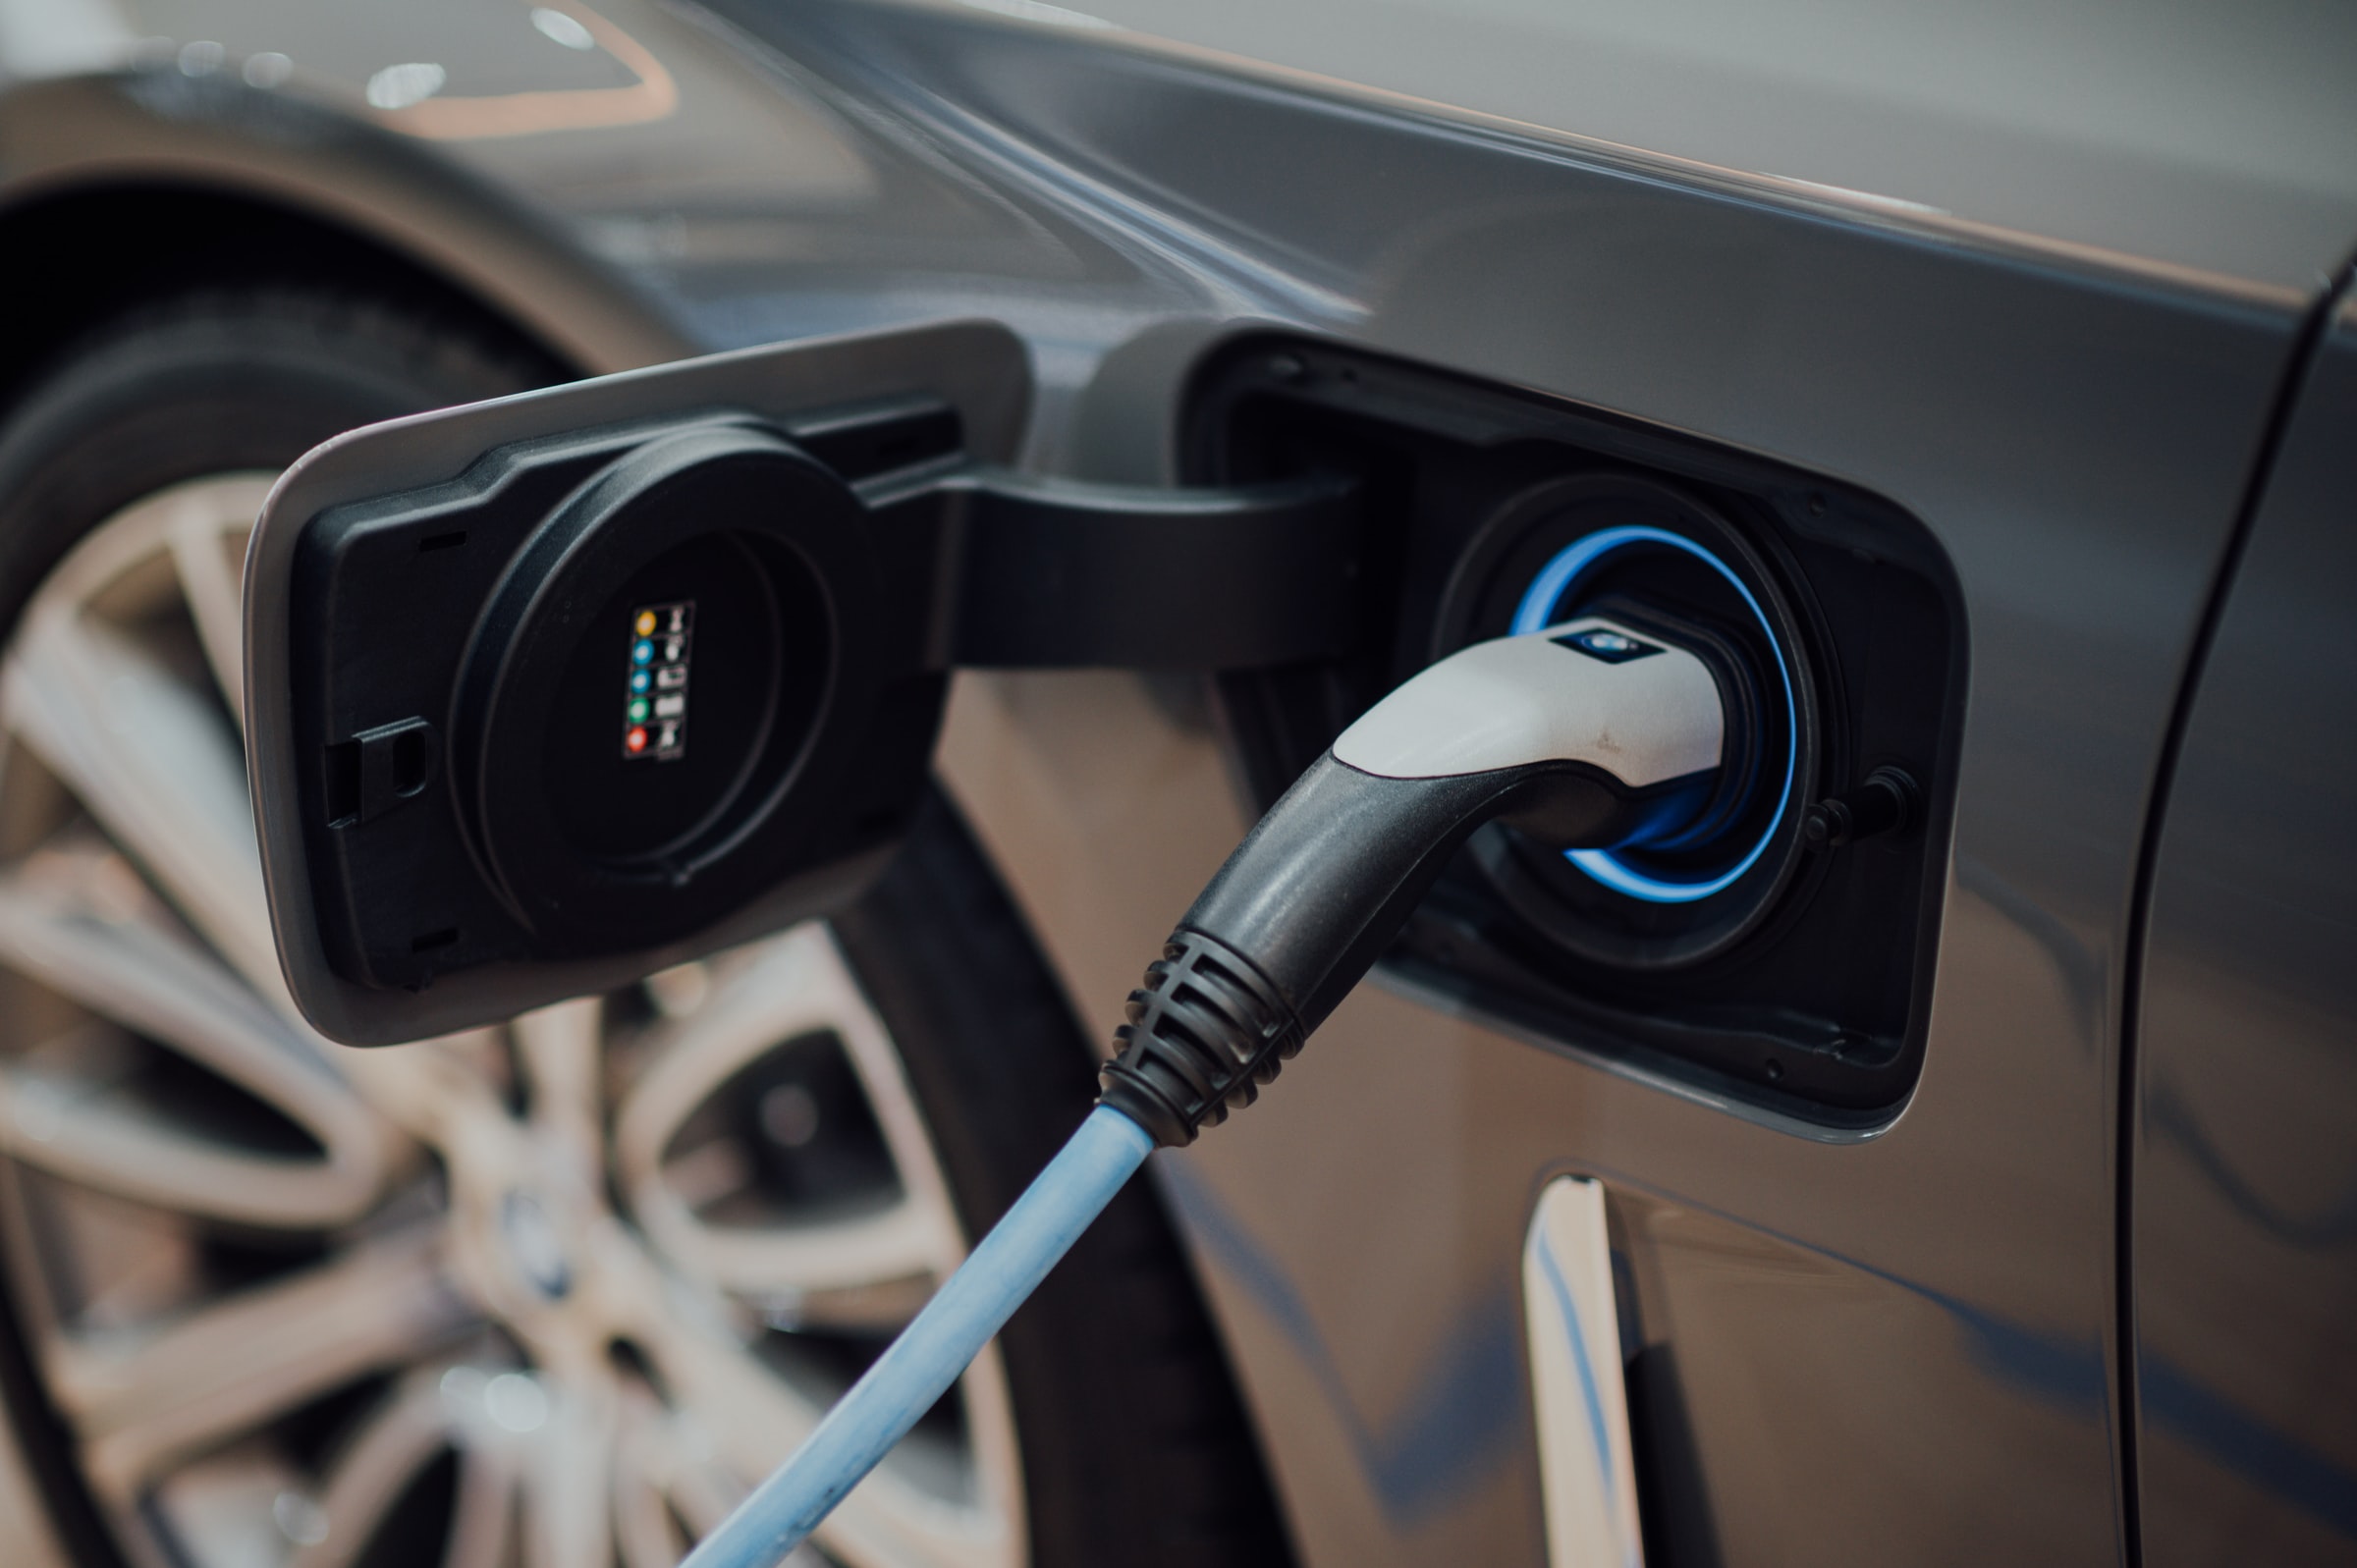 EV Charging Electrical Services